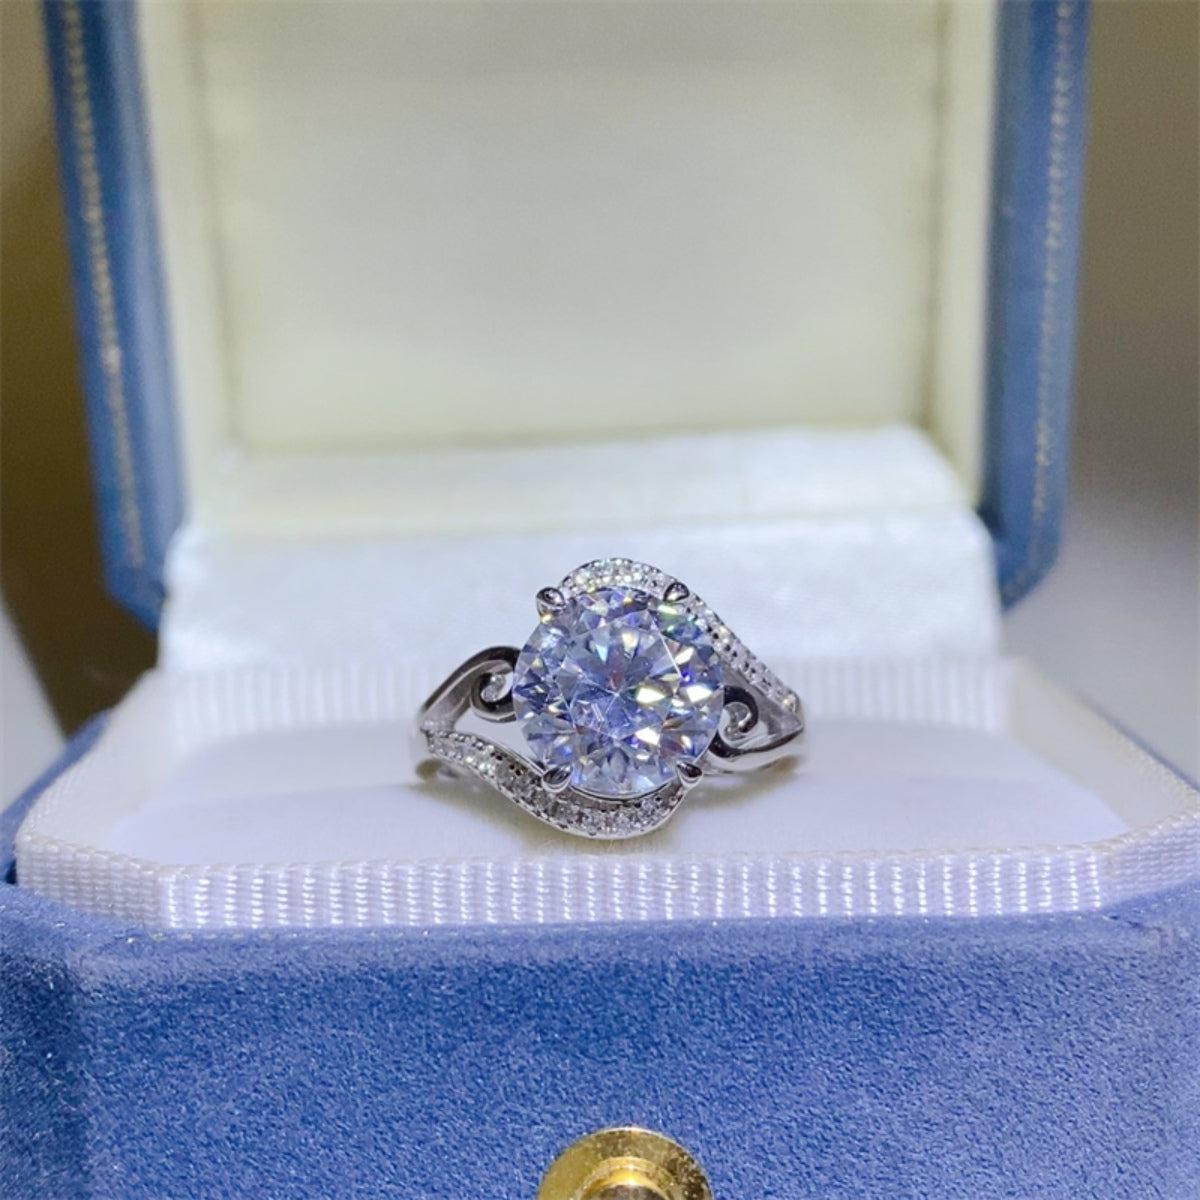 a diamond ring sits in a blue box